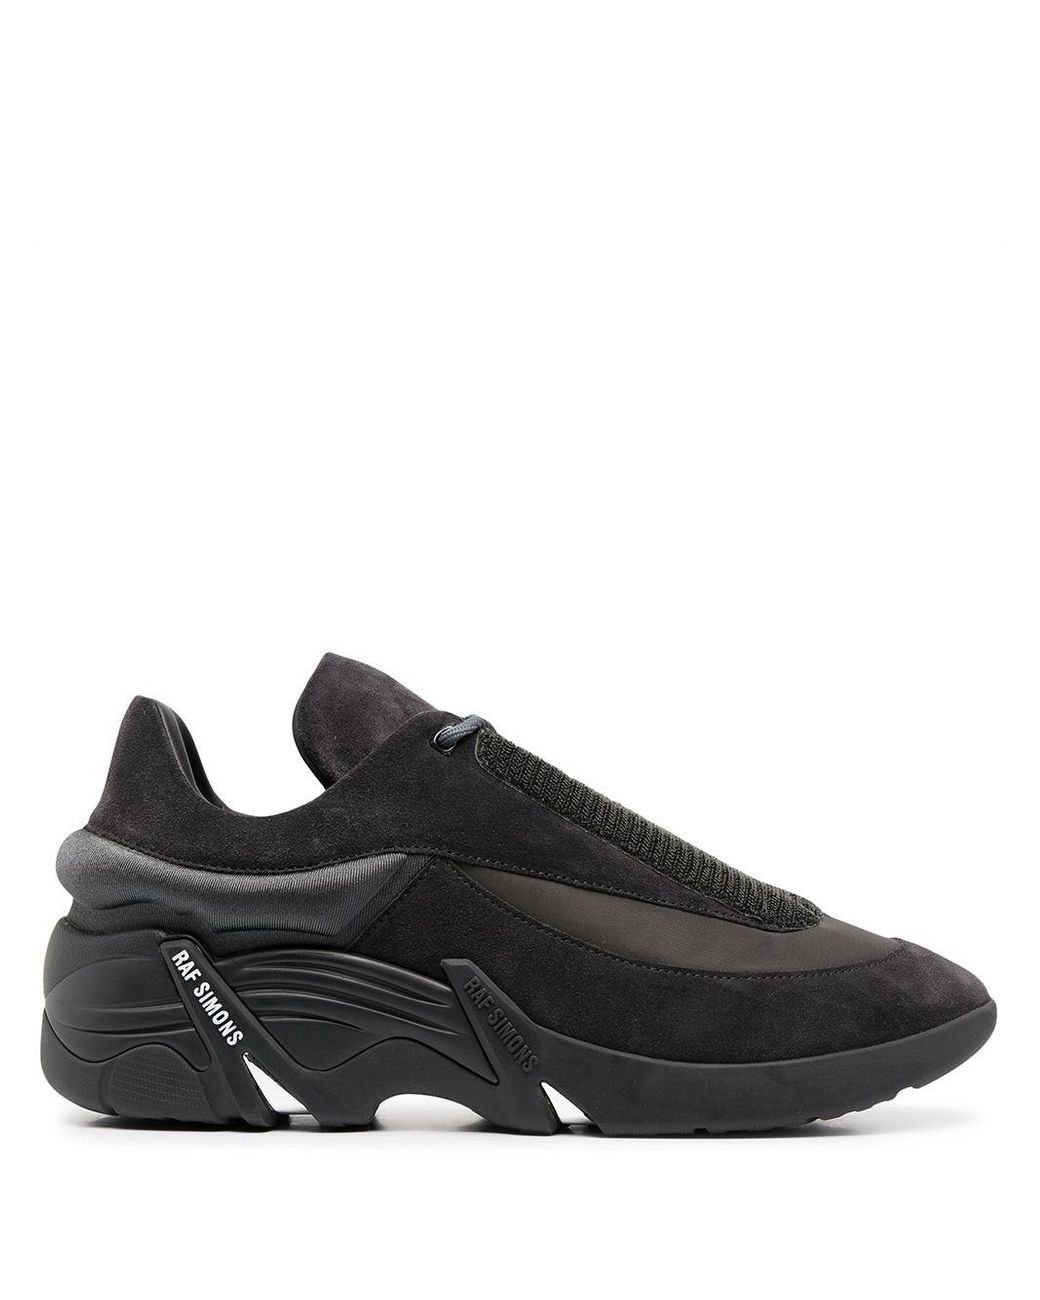 Raf Simons Synthetic Antei Sneakers in Grey (Gray) for Men - Lyst